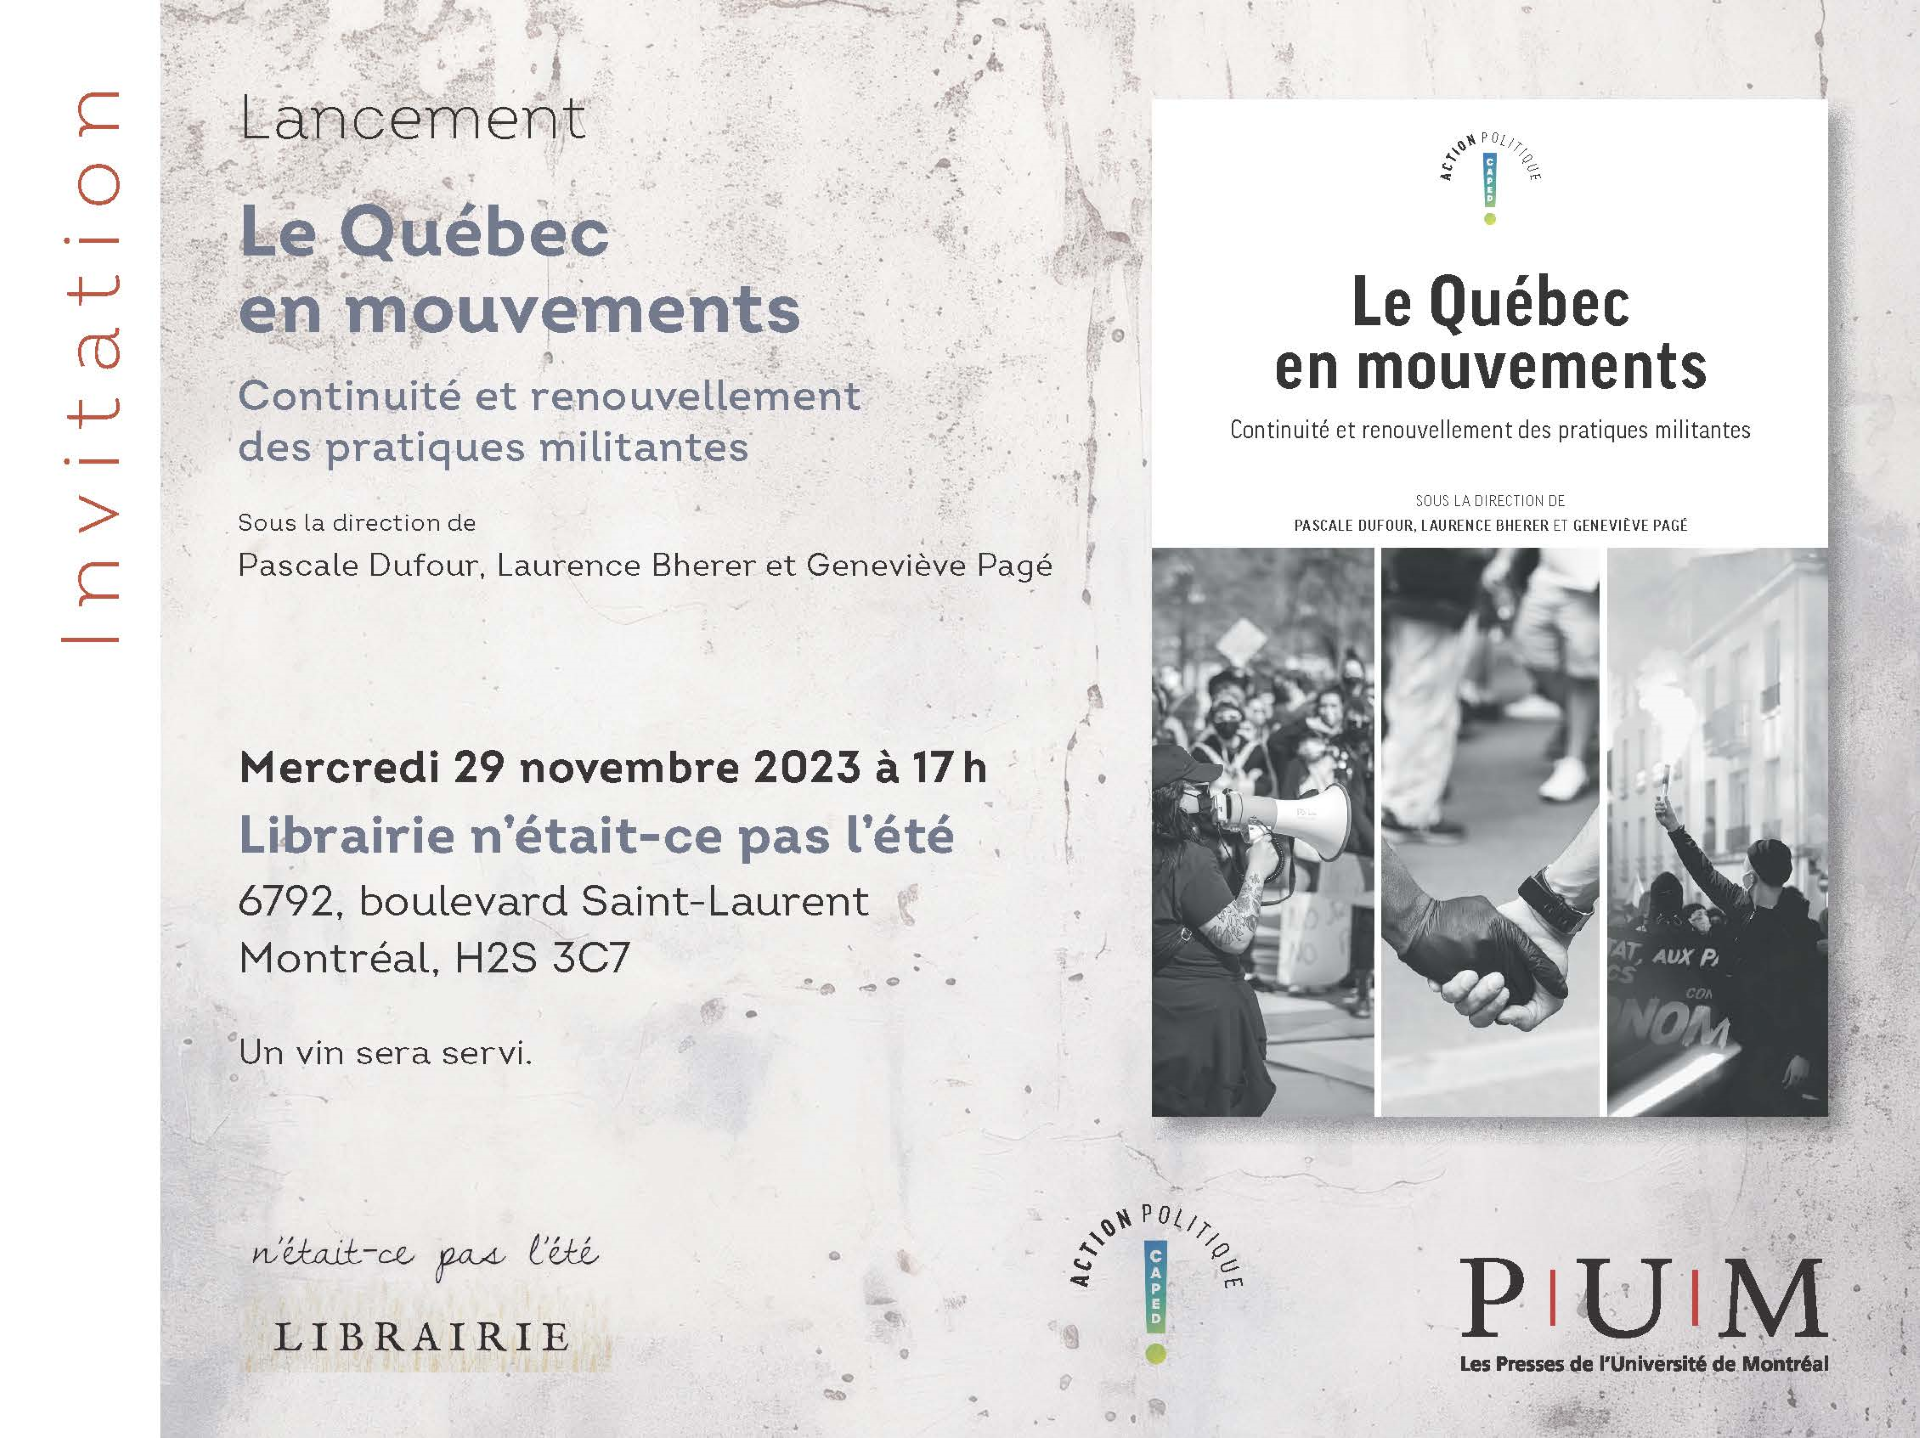 Release of the book Le Québec en mouvements, to which 3 Chair members contributed 2 chapters!